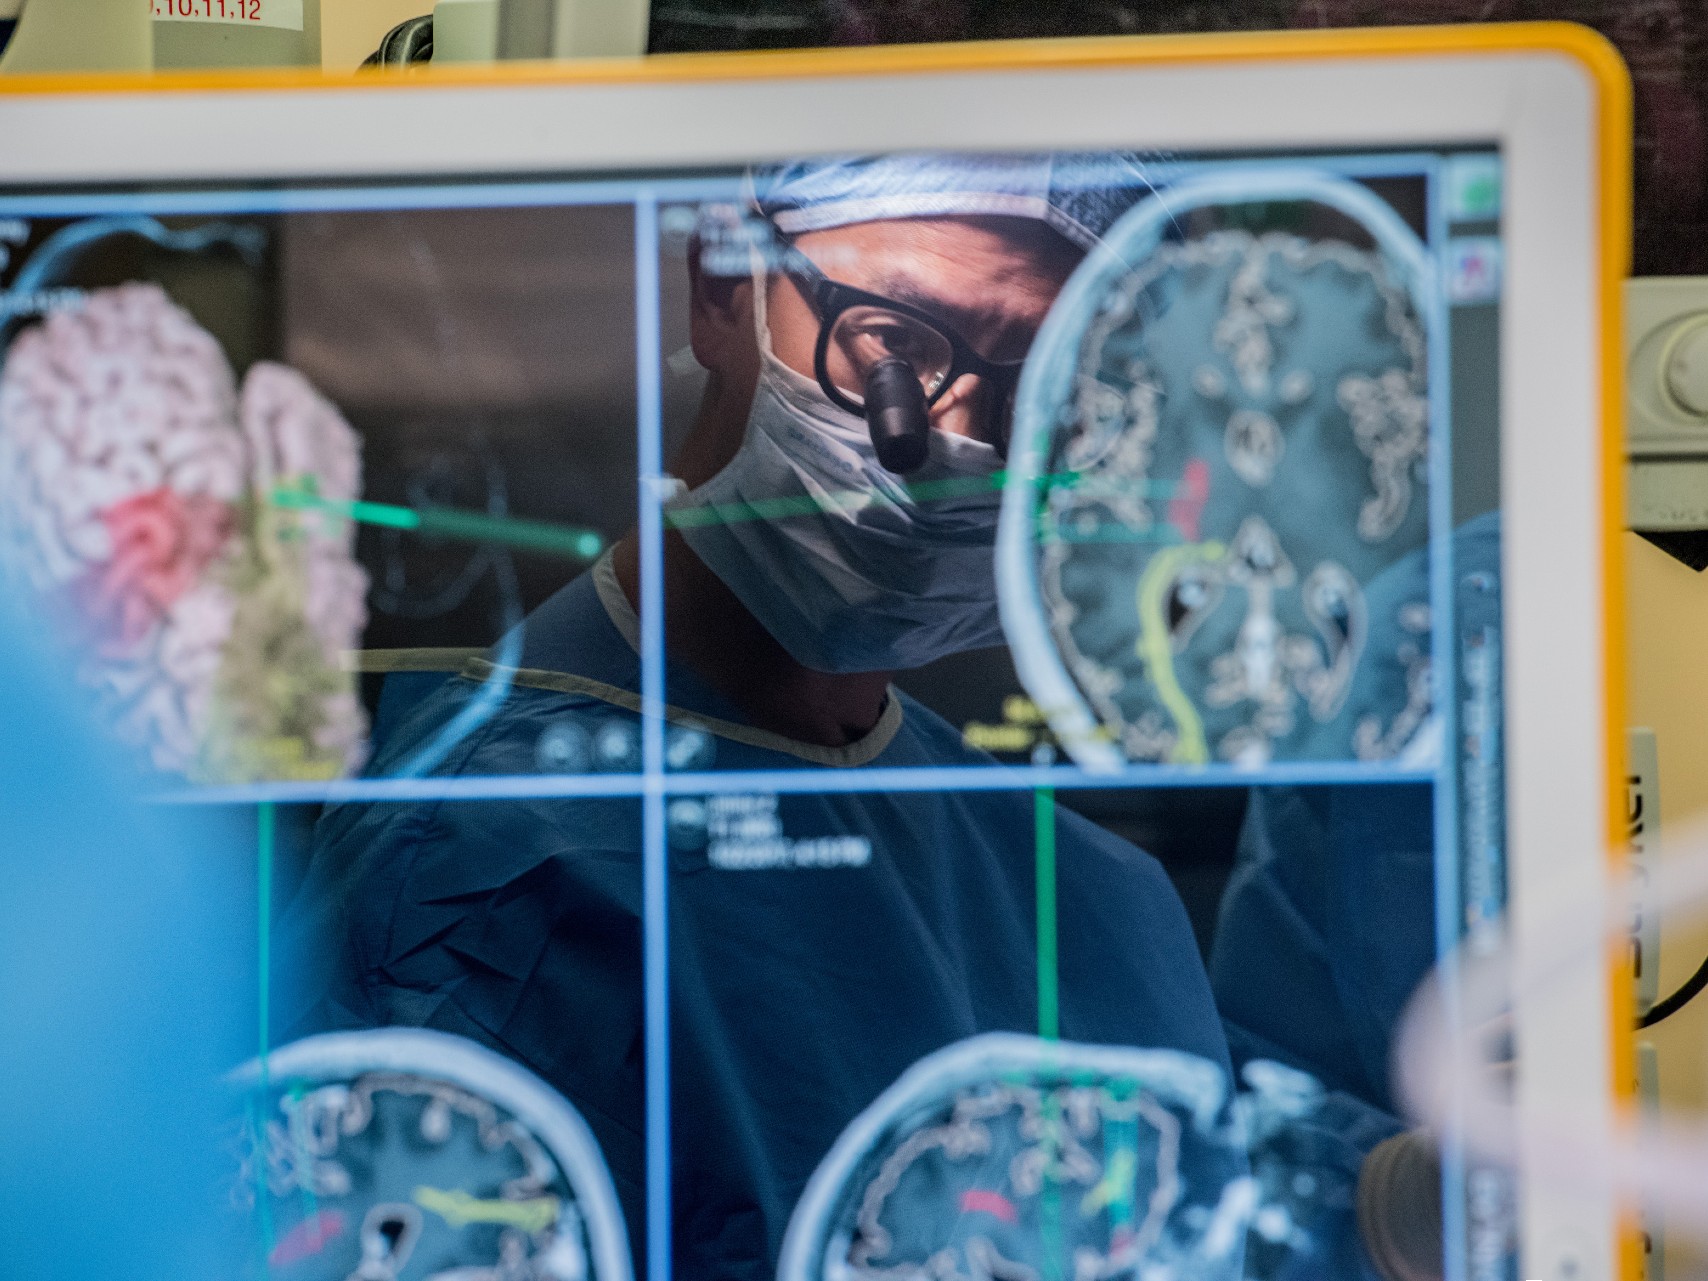 A doctor looks at images of a brain as he performs surgery.